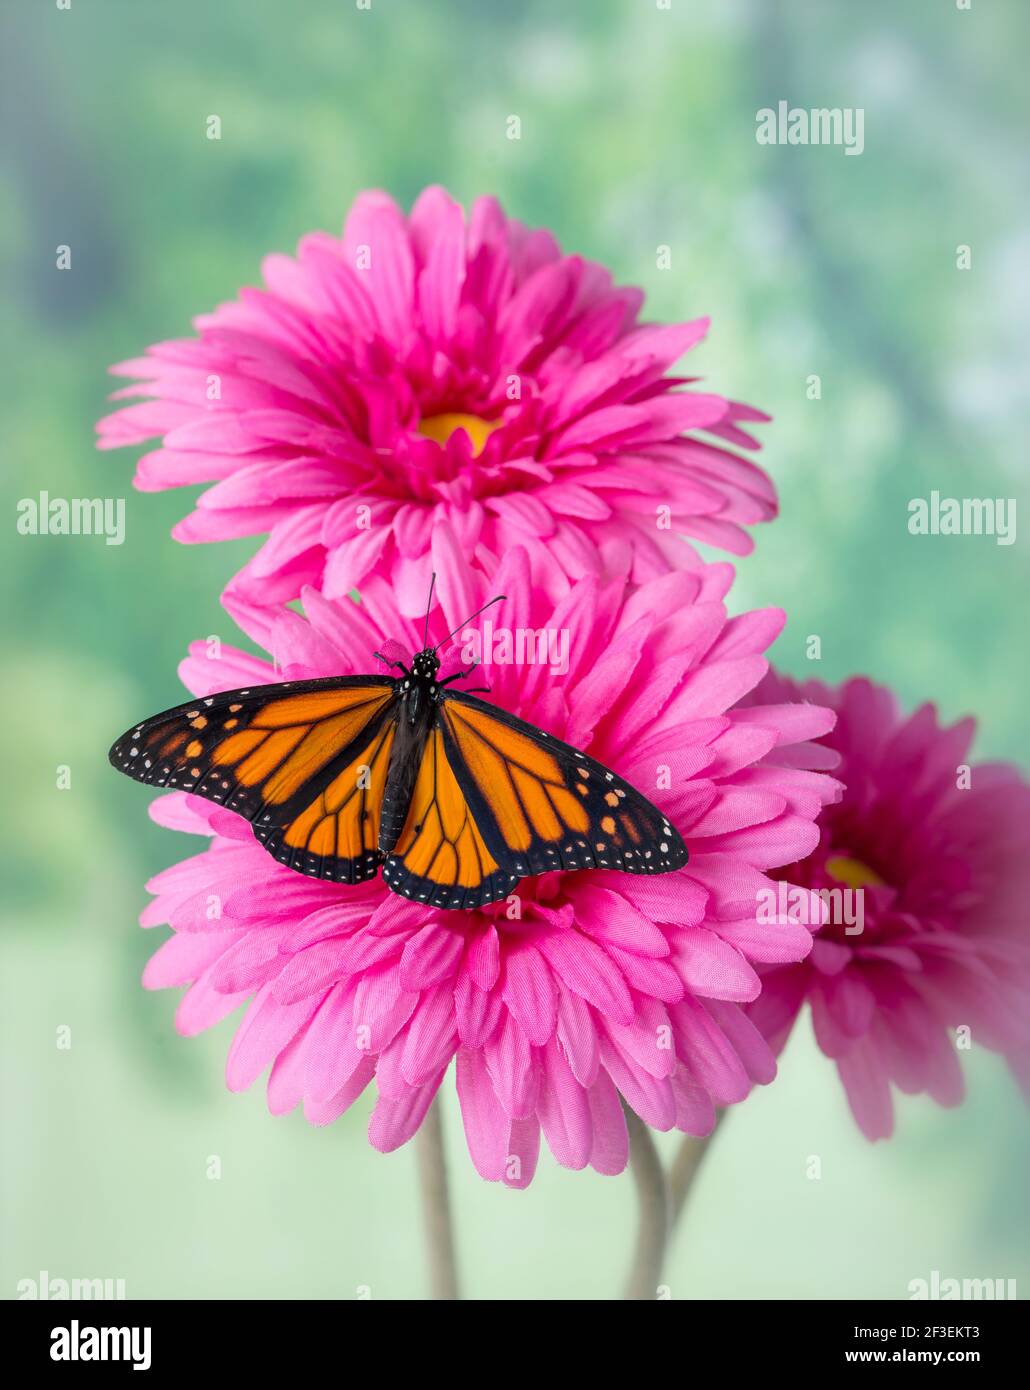 Monarch Butterfly with wings spread, on a pink artifical gerbera daisy flower Stock Photo